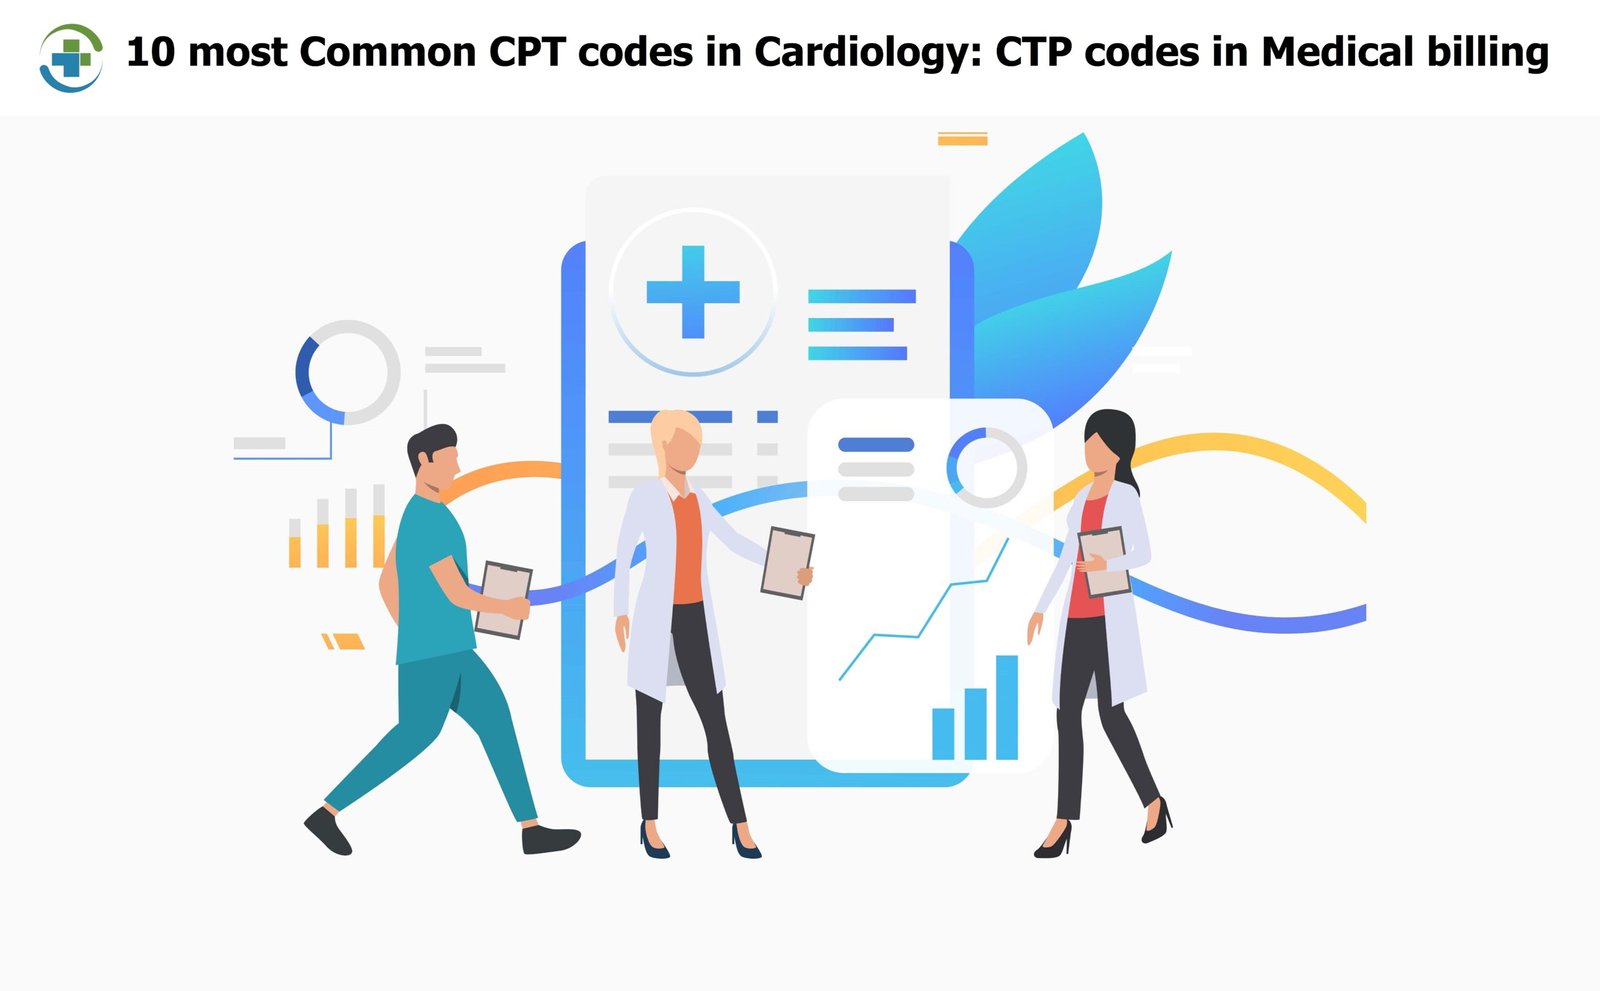 10 most Common CPT codes in Cardiology: CTP codes in Medical billing